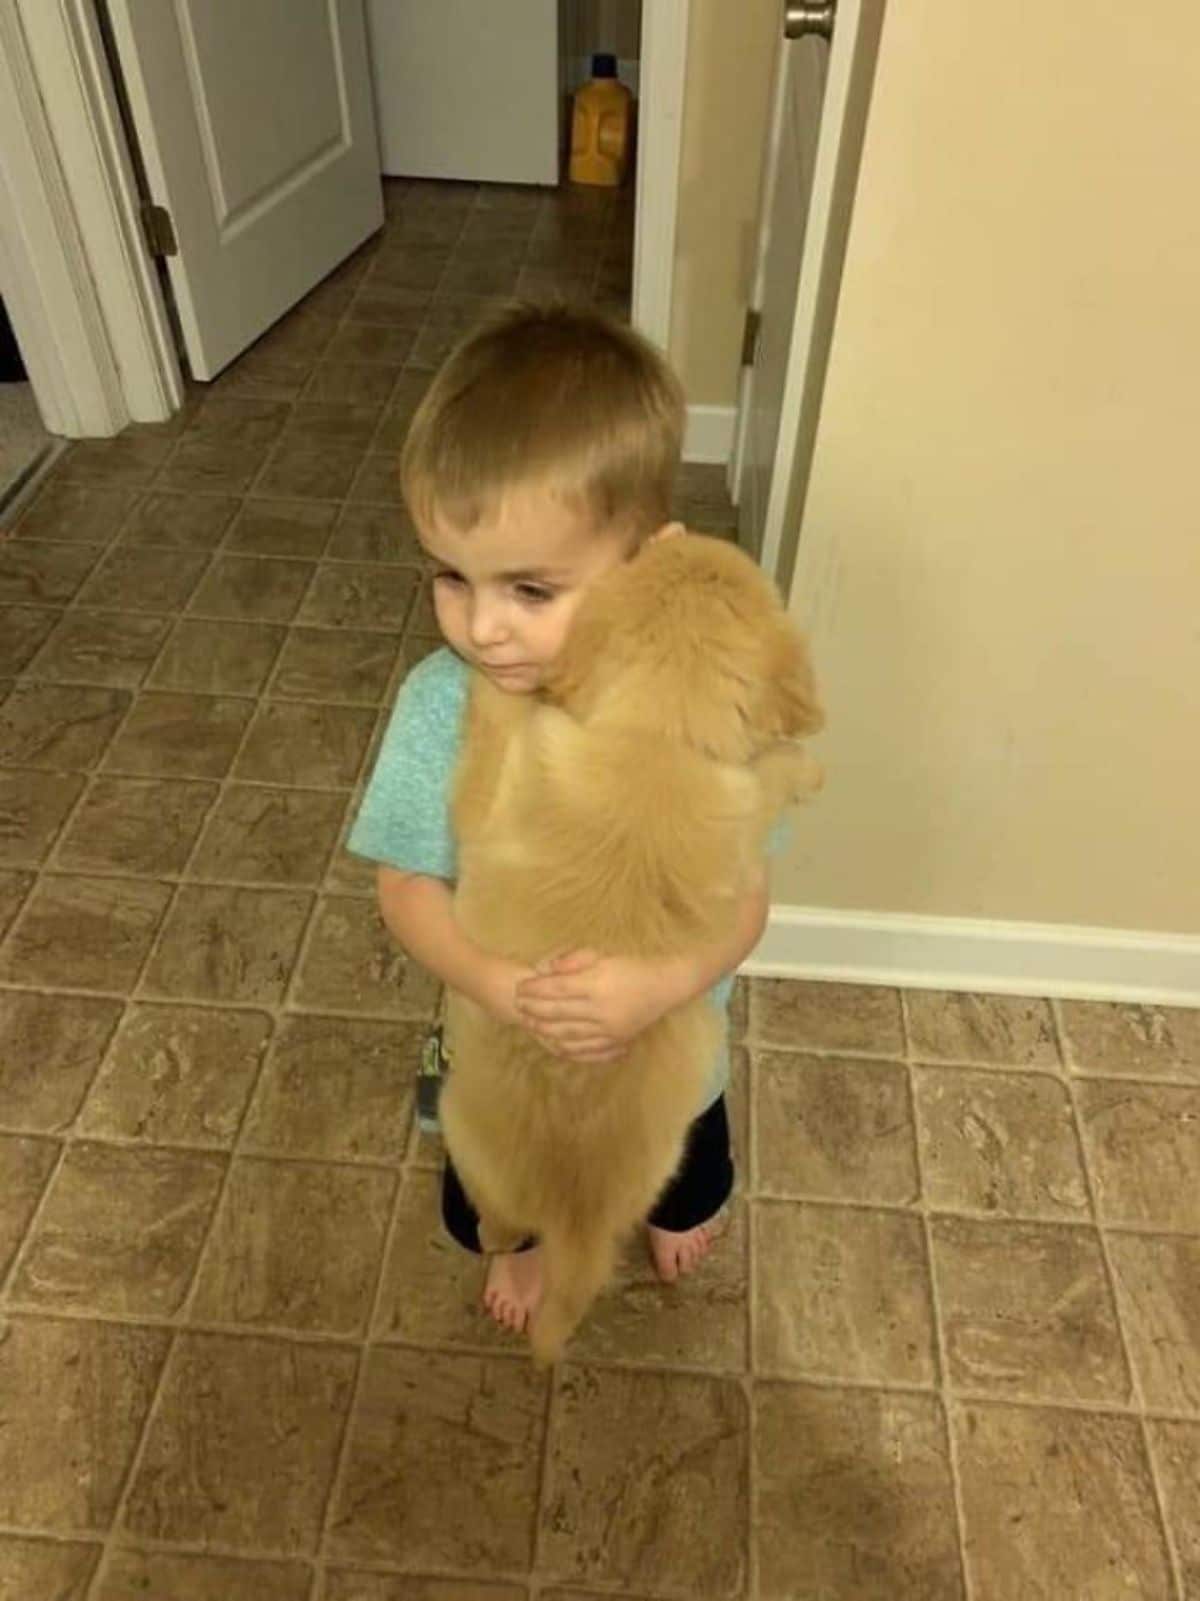 little boy standing and carrying a golden retriever puppy who is hugging the boy back